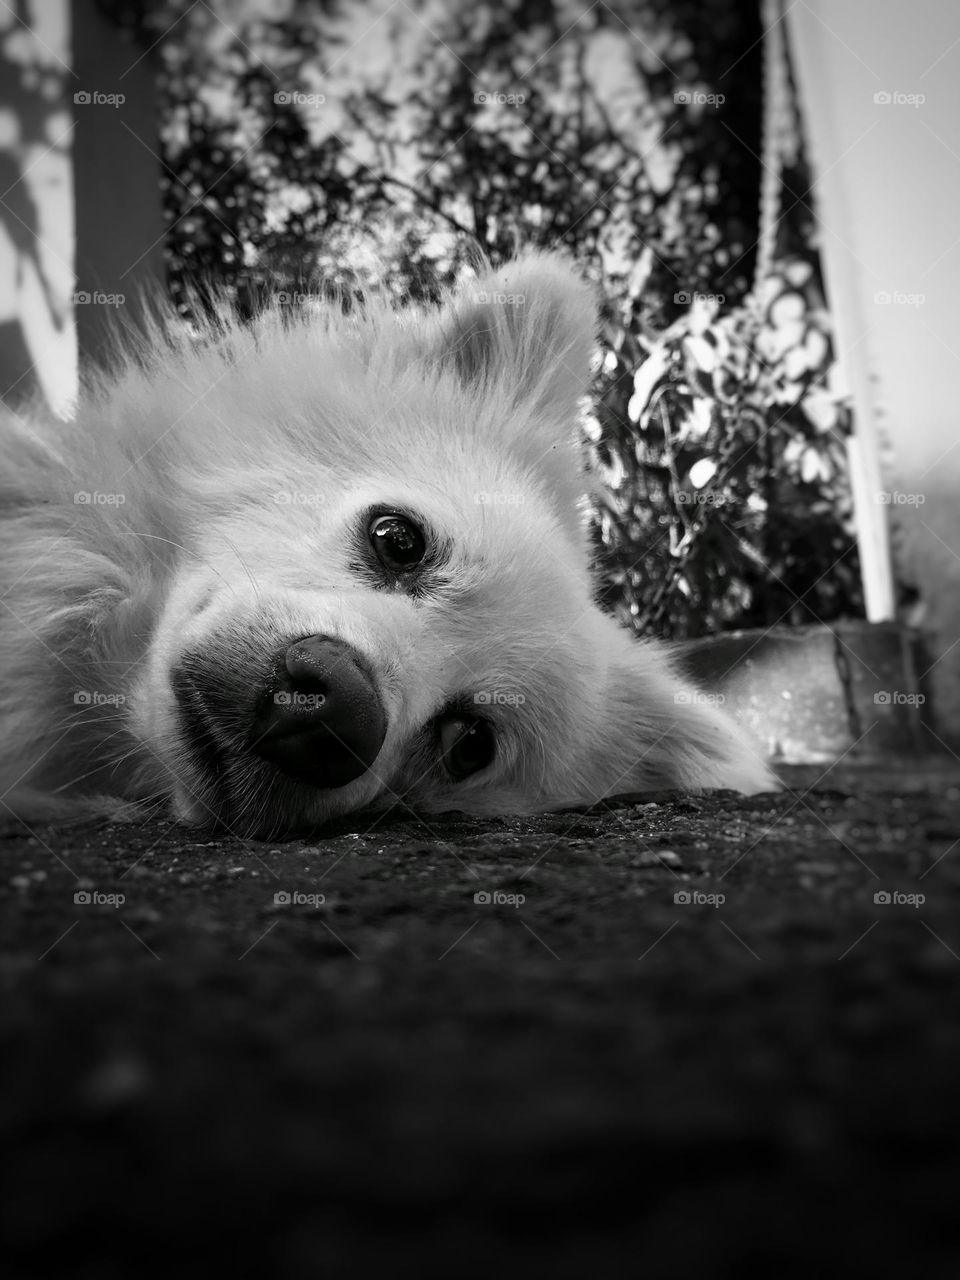 A sad Pomeranian dog lying down waiting for a free and exciting life